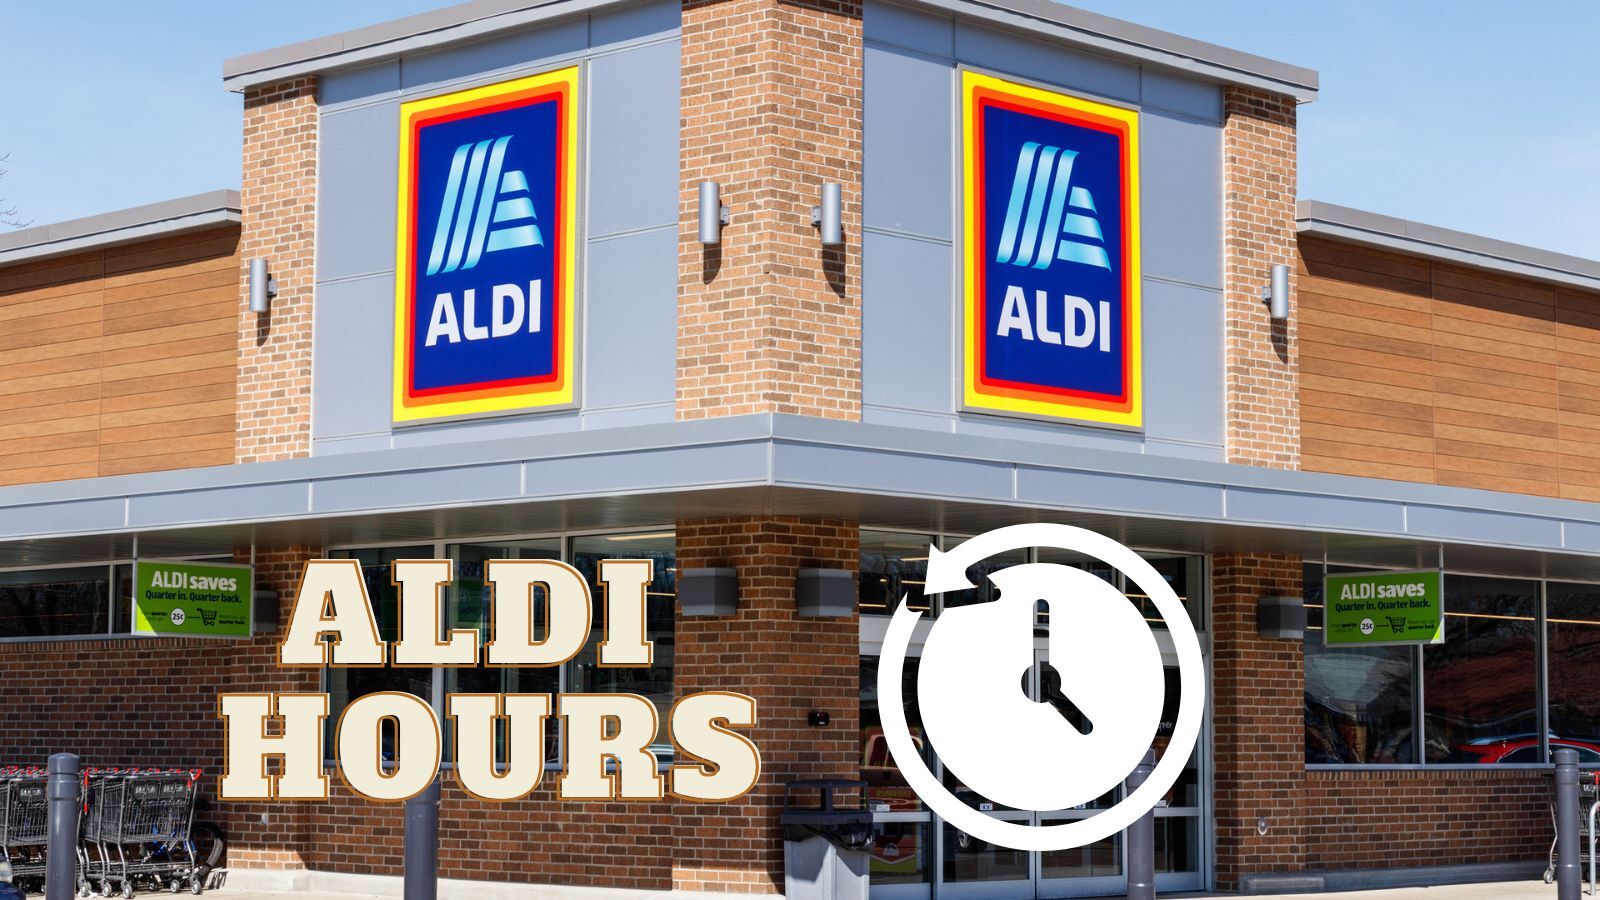 Aldi Hours - All You Need to Know!